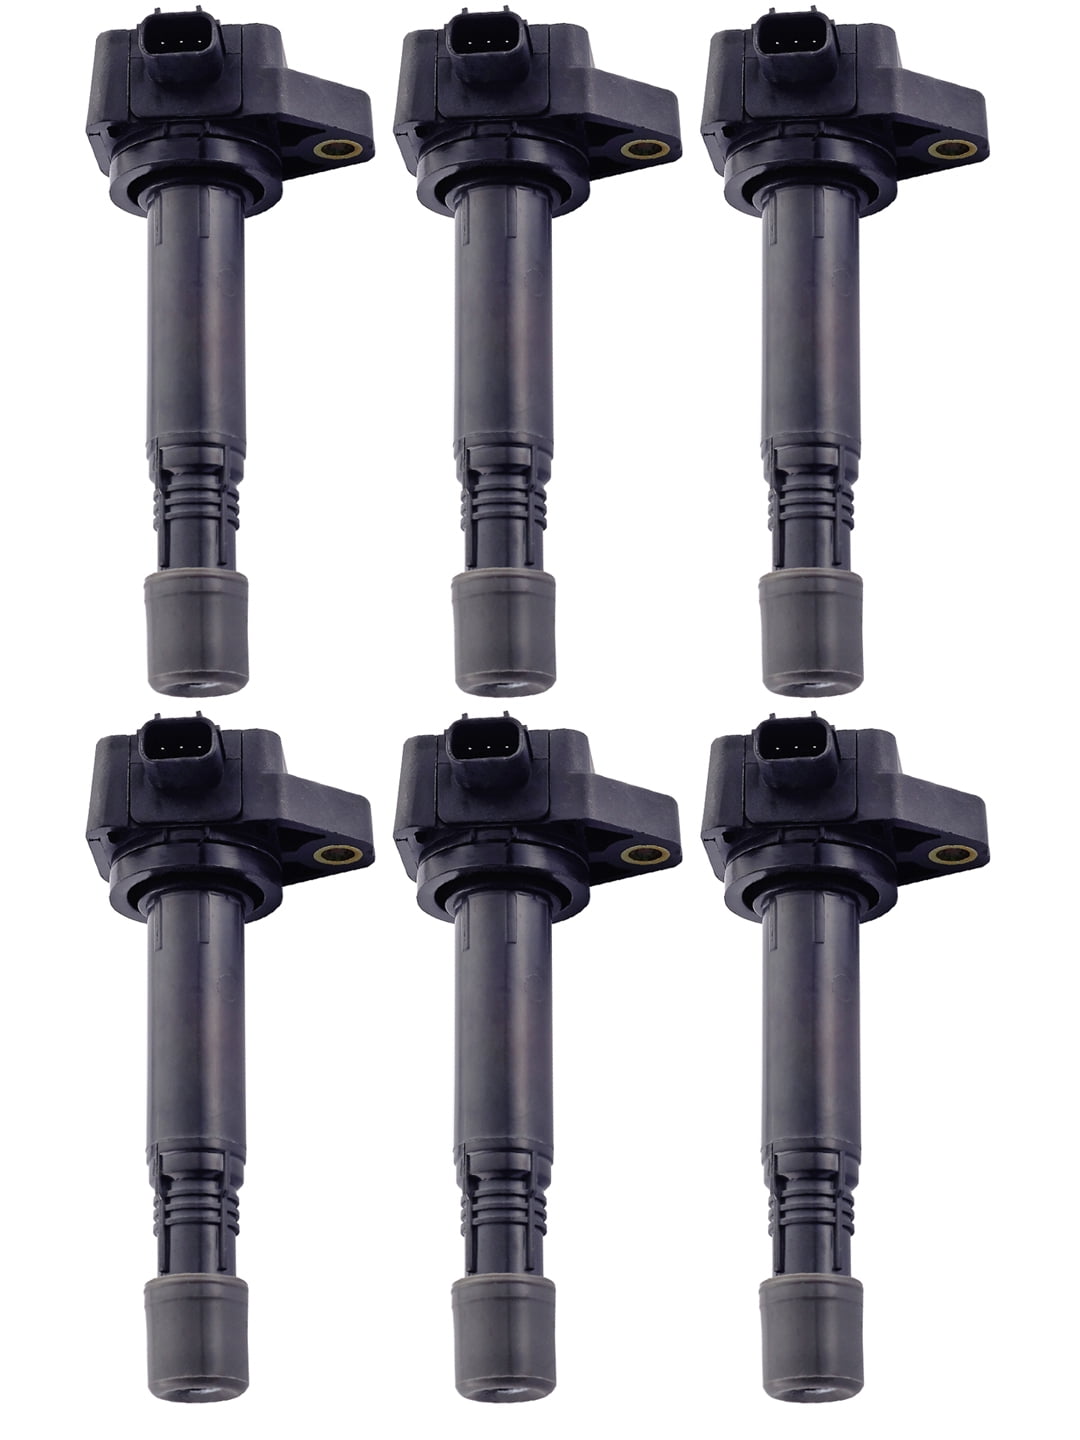 A-Premium Ignition Coil Pack Compatible with Honda Accord 2008-2012 Odyssey 2008-2017 Acura RL TL TSX 2009-2014 3.5L 3.7L 6-PC Set 